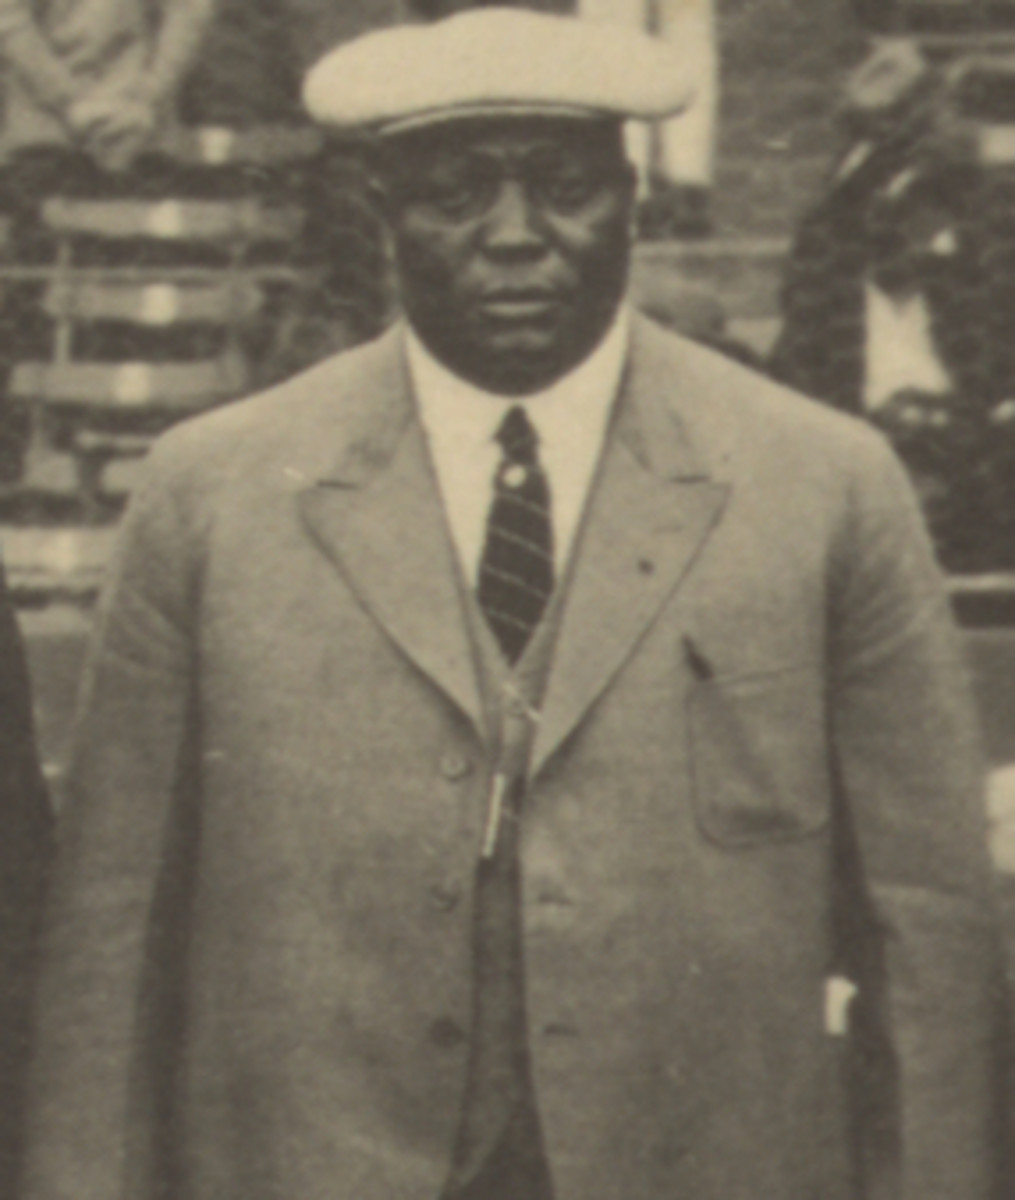 Andrew “Rube” Foster founded the Negro National League, the first professional Black baseball league, in 1920 in Kansas City, Mo.